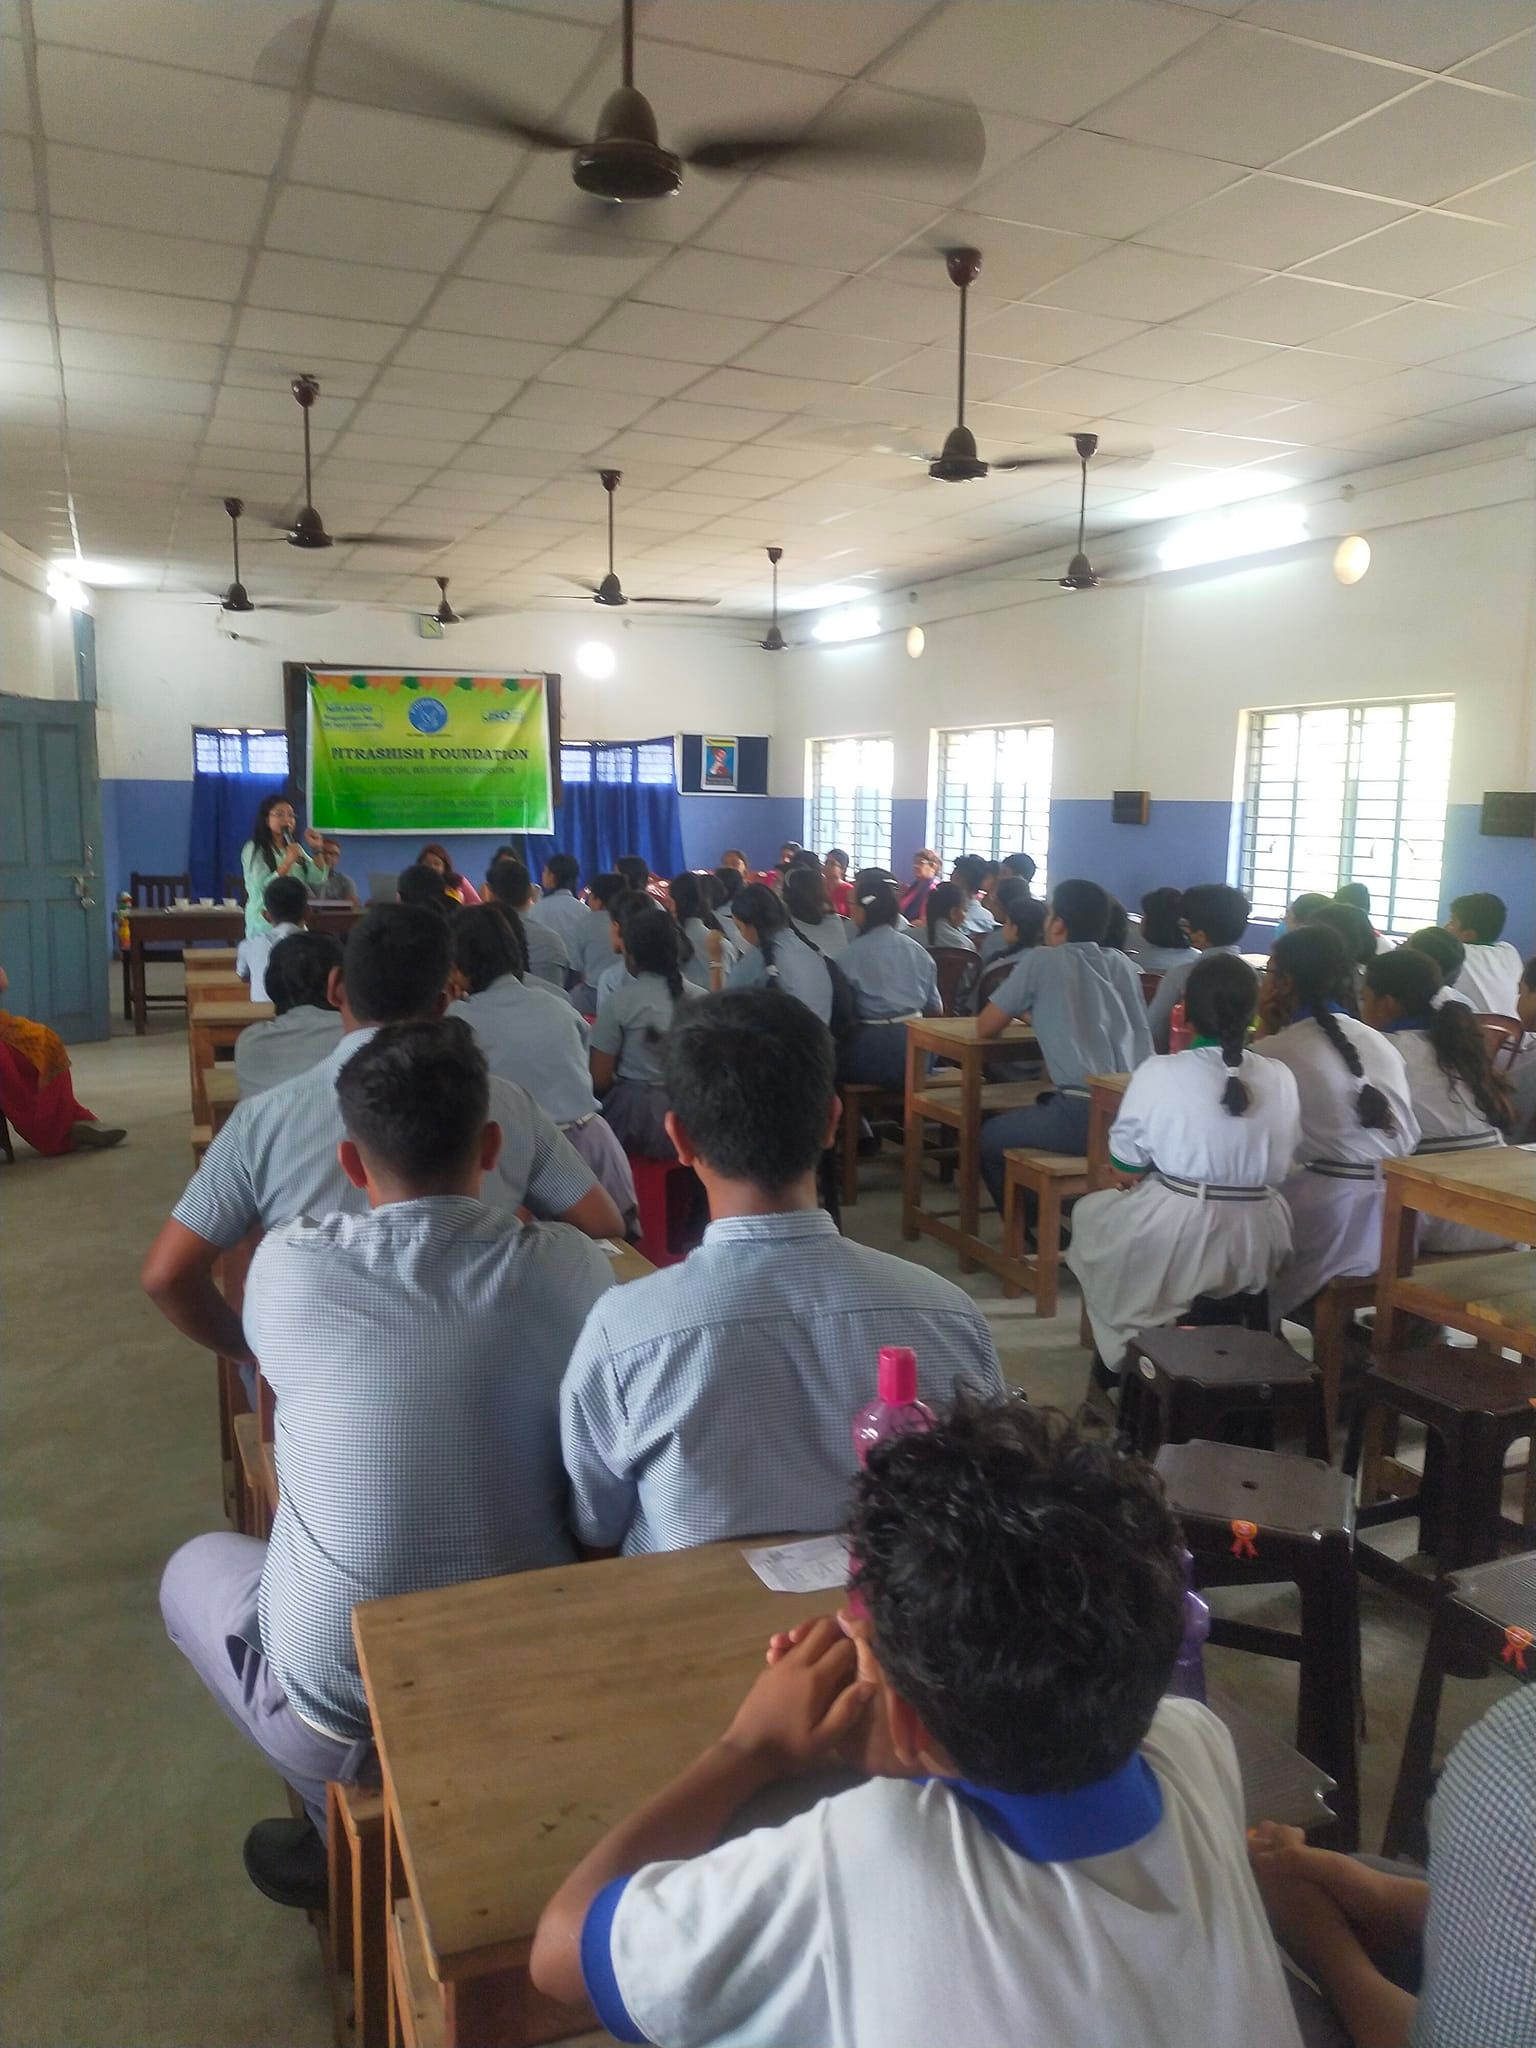 Senior students of St Stephen's School Kalyani, participated in Awareness Program and Interactive session conducted by a NGO named Pitrashish Foundation.